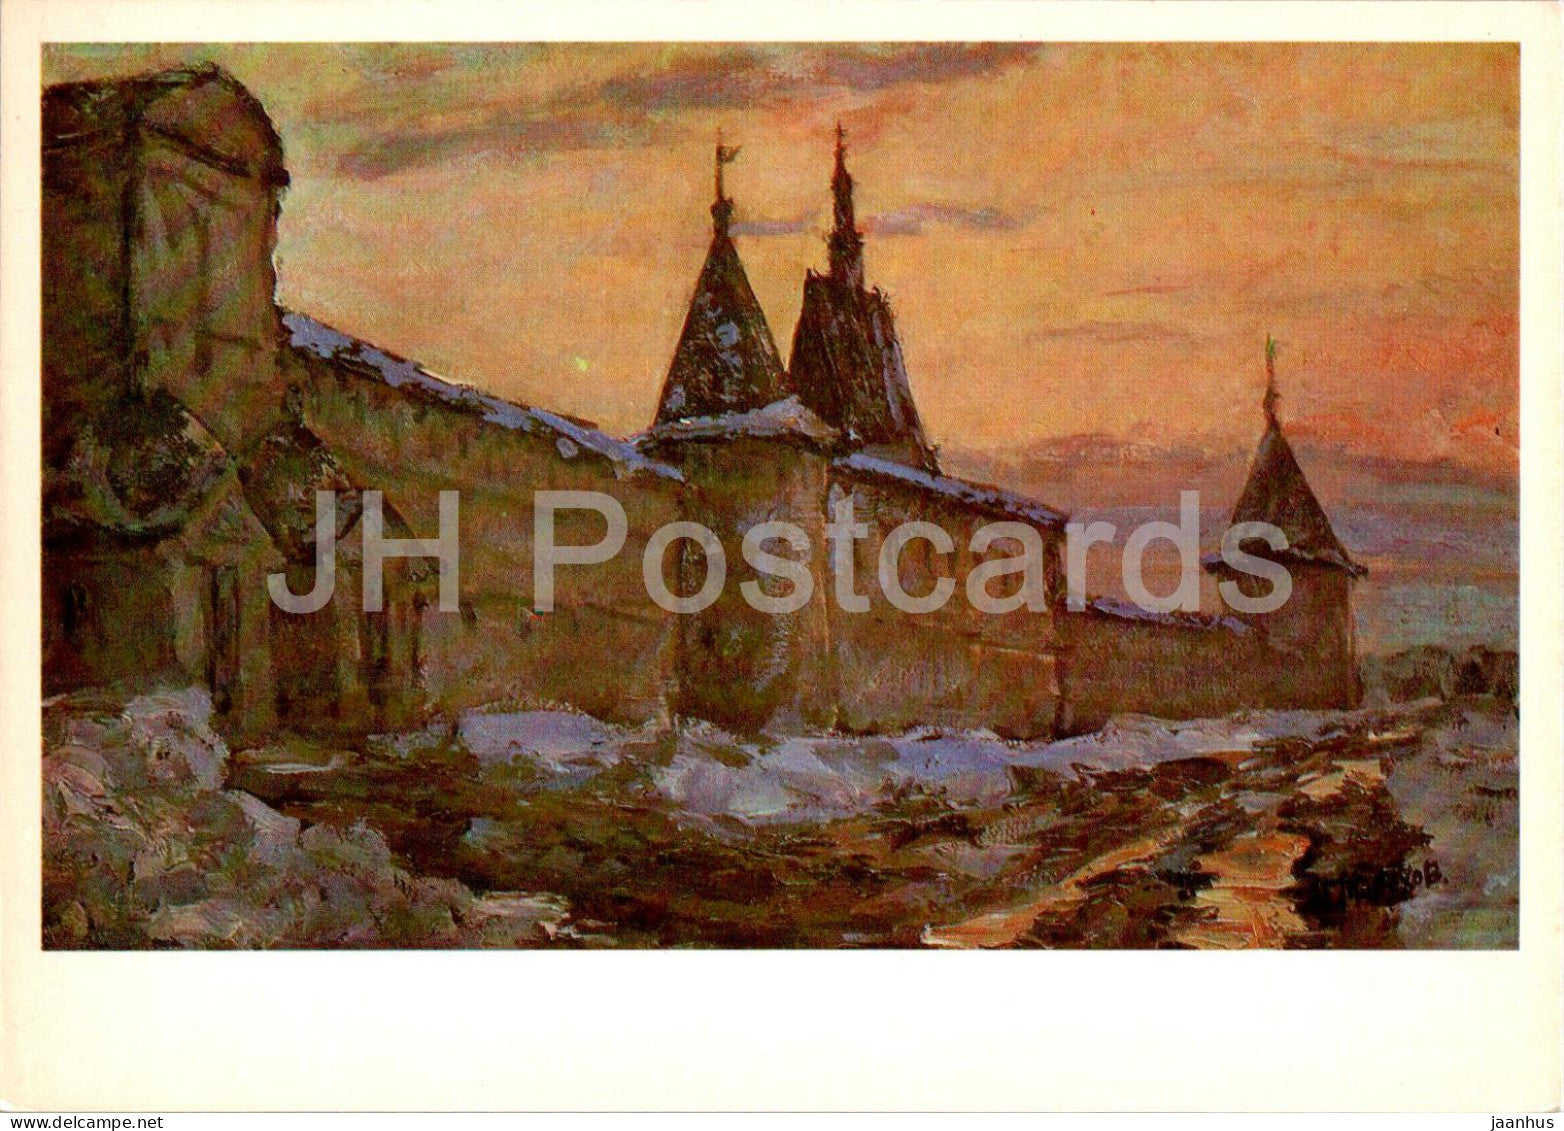 Kostroma - at the walls of the Ipatiev Monastery - by A. Malakhov - 1980 - Russia USSR - unused - JH Postcards